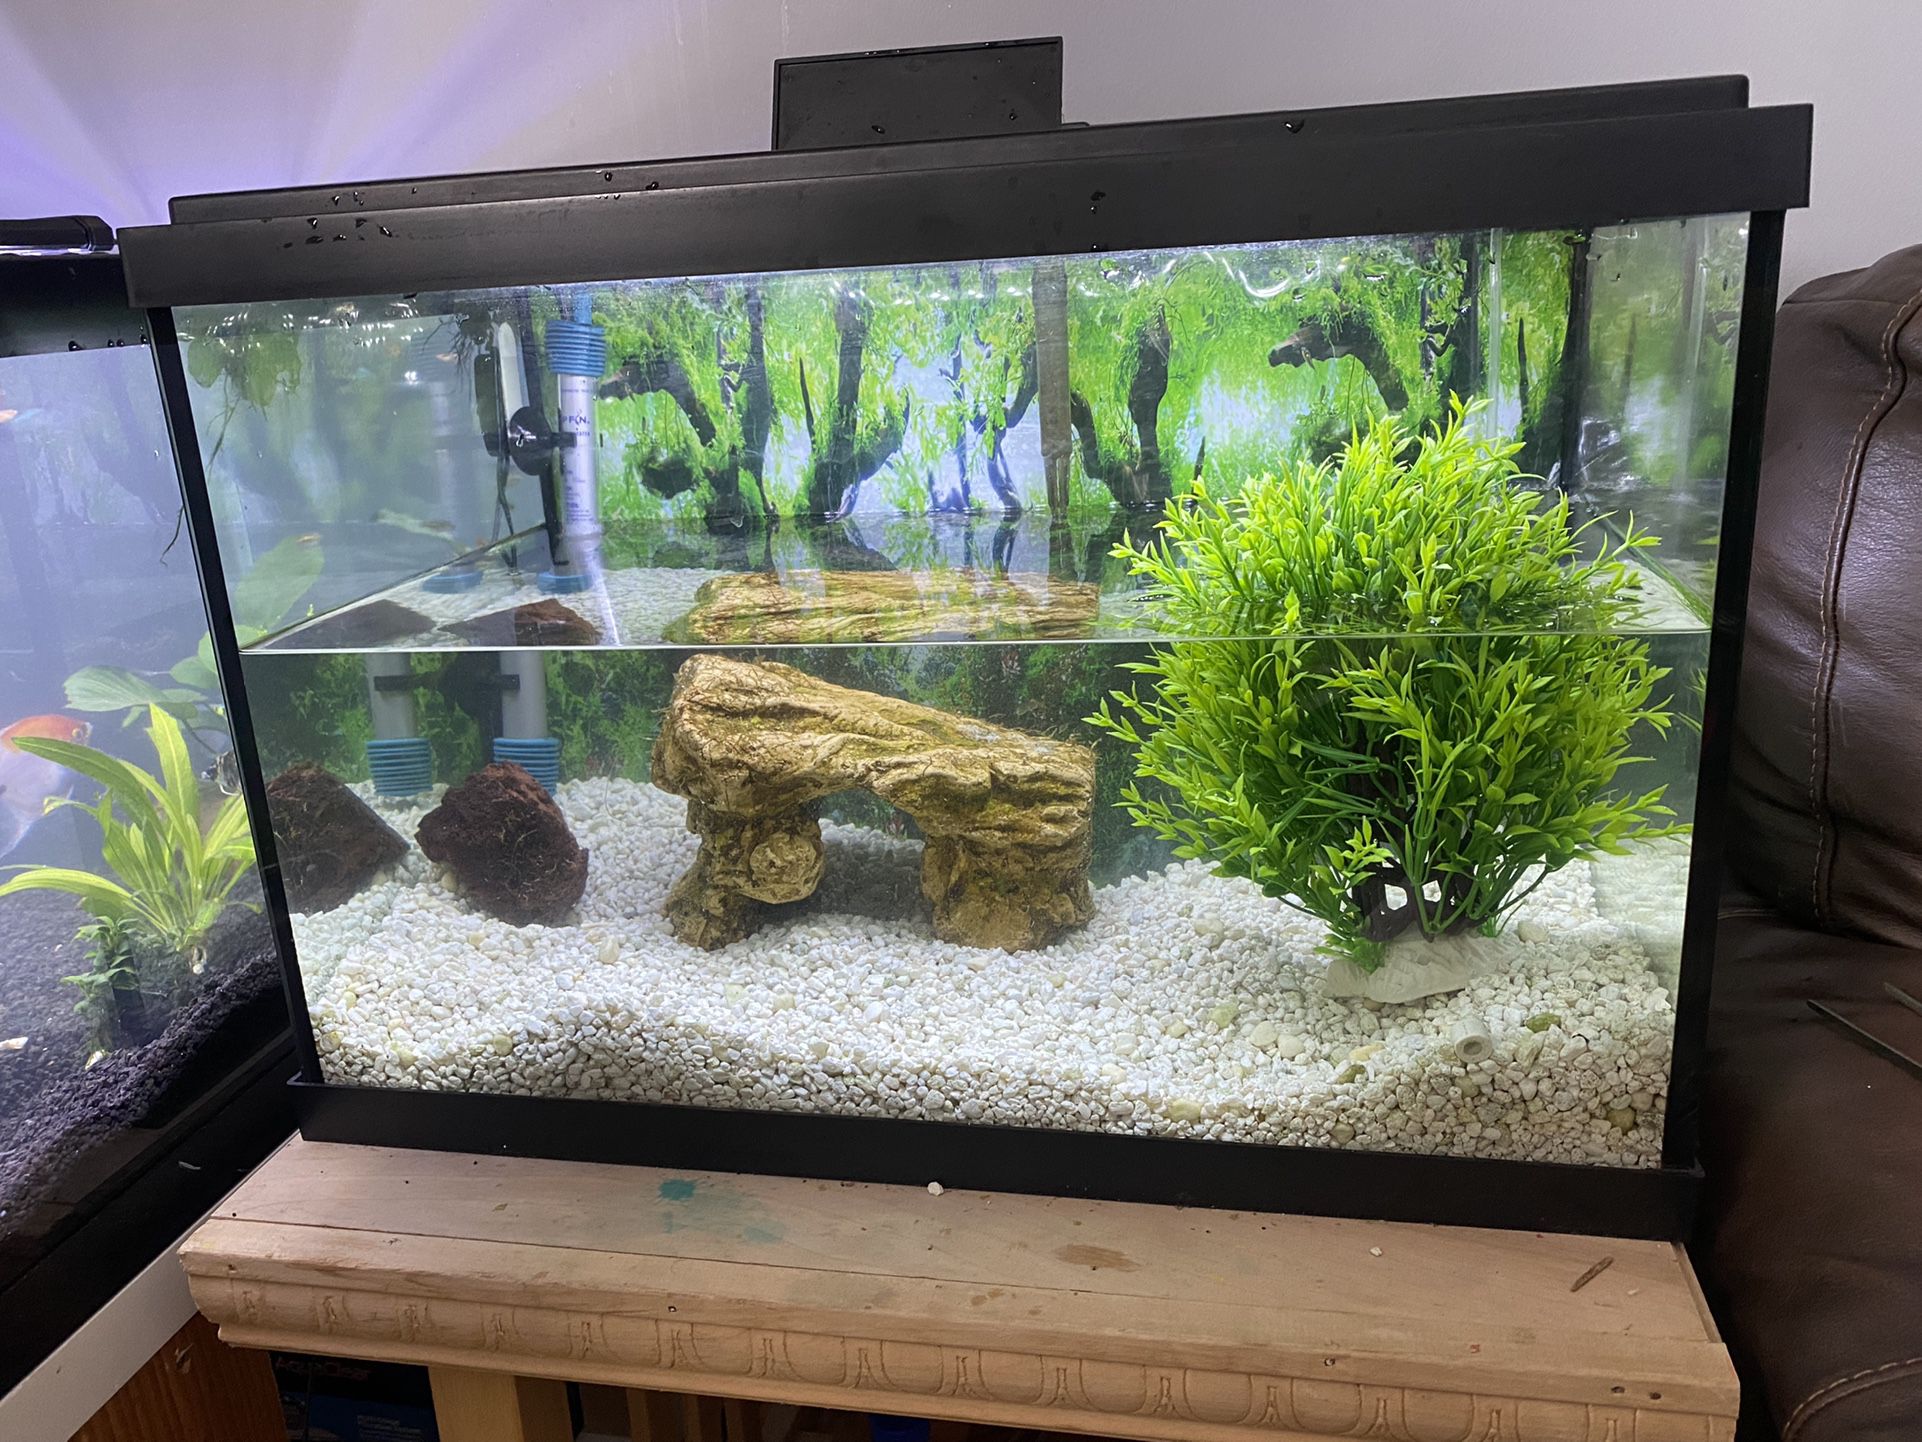 20  Gallon fish tank  for sale! , I just upgraded to a bigger tank.